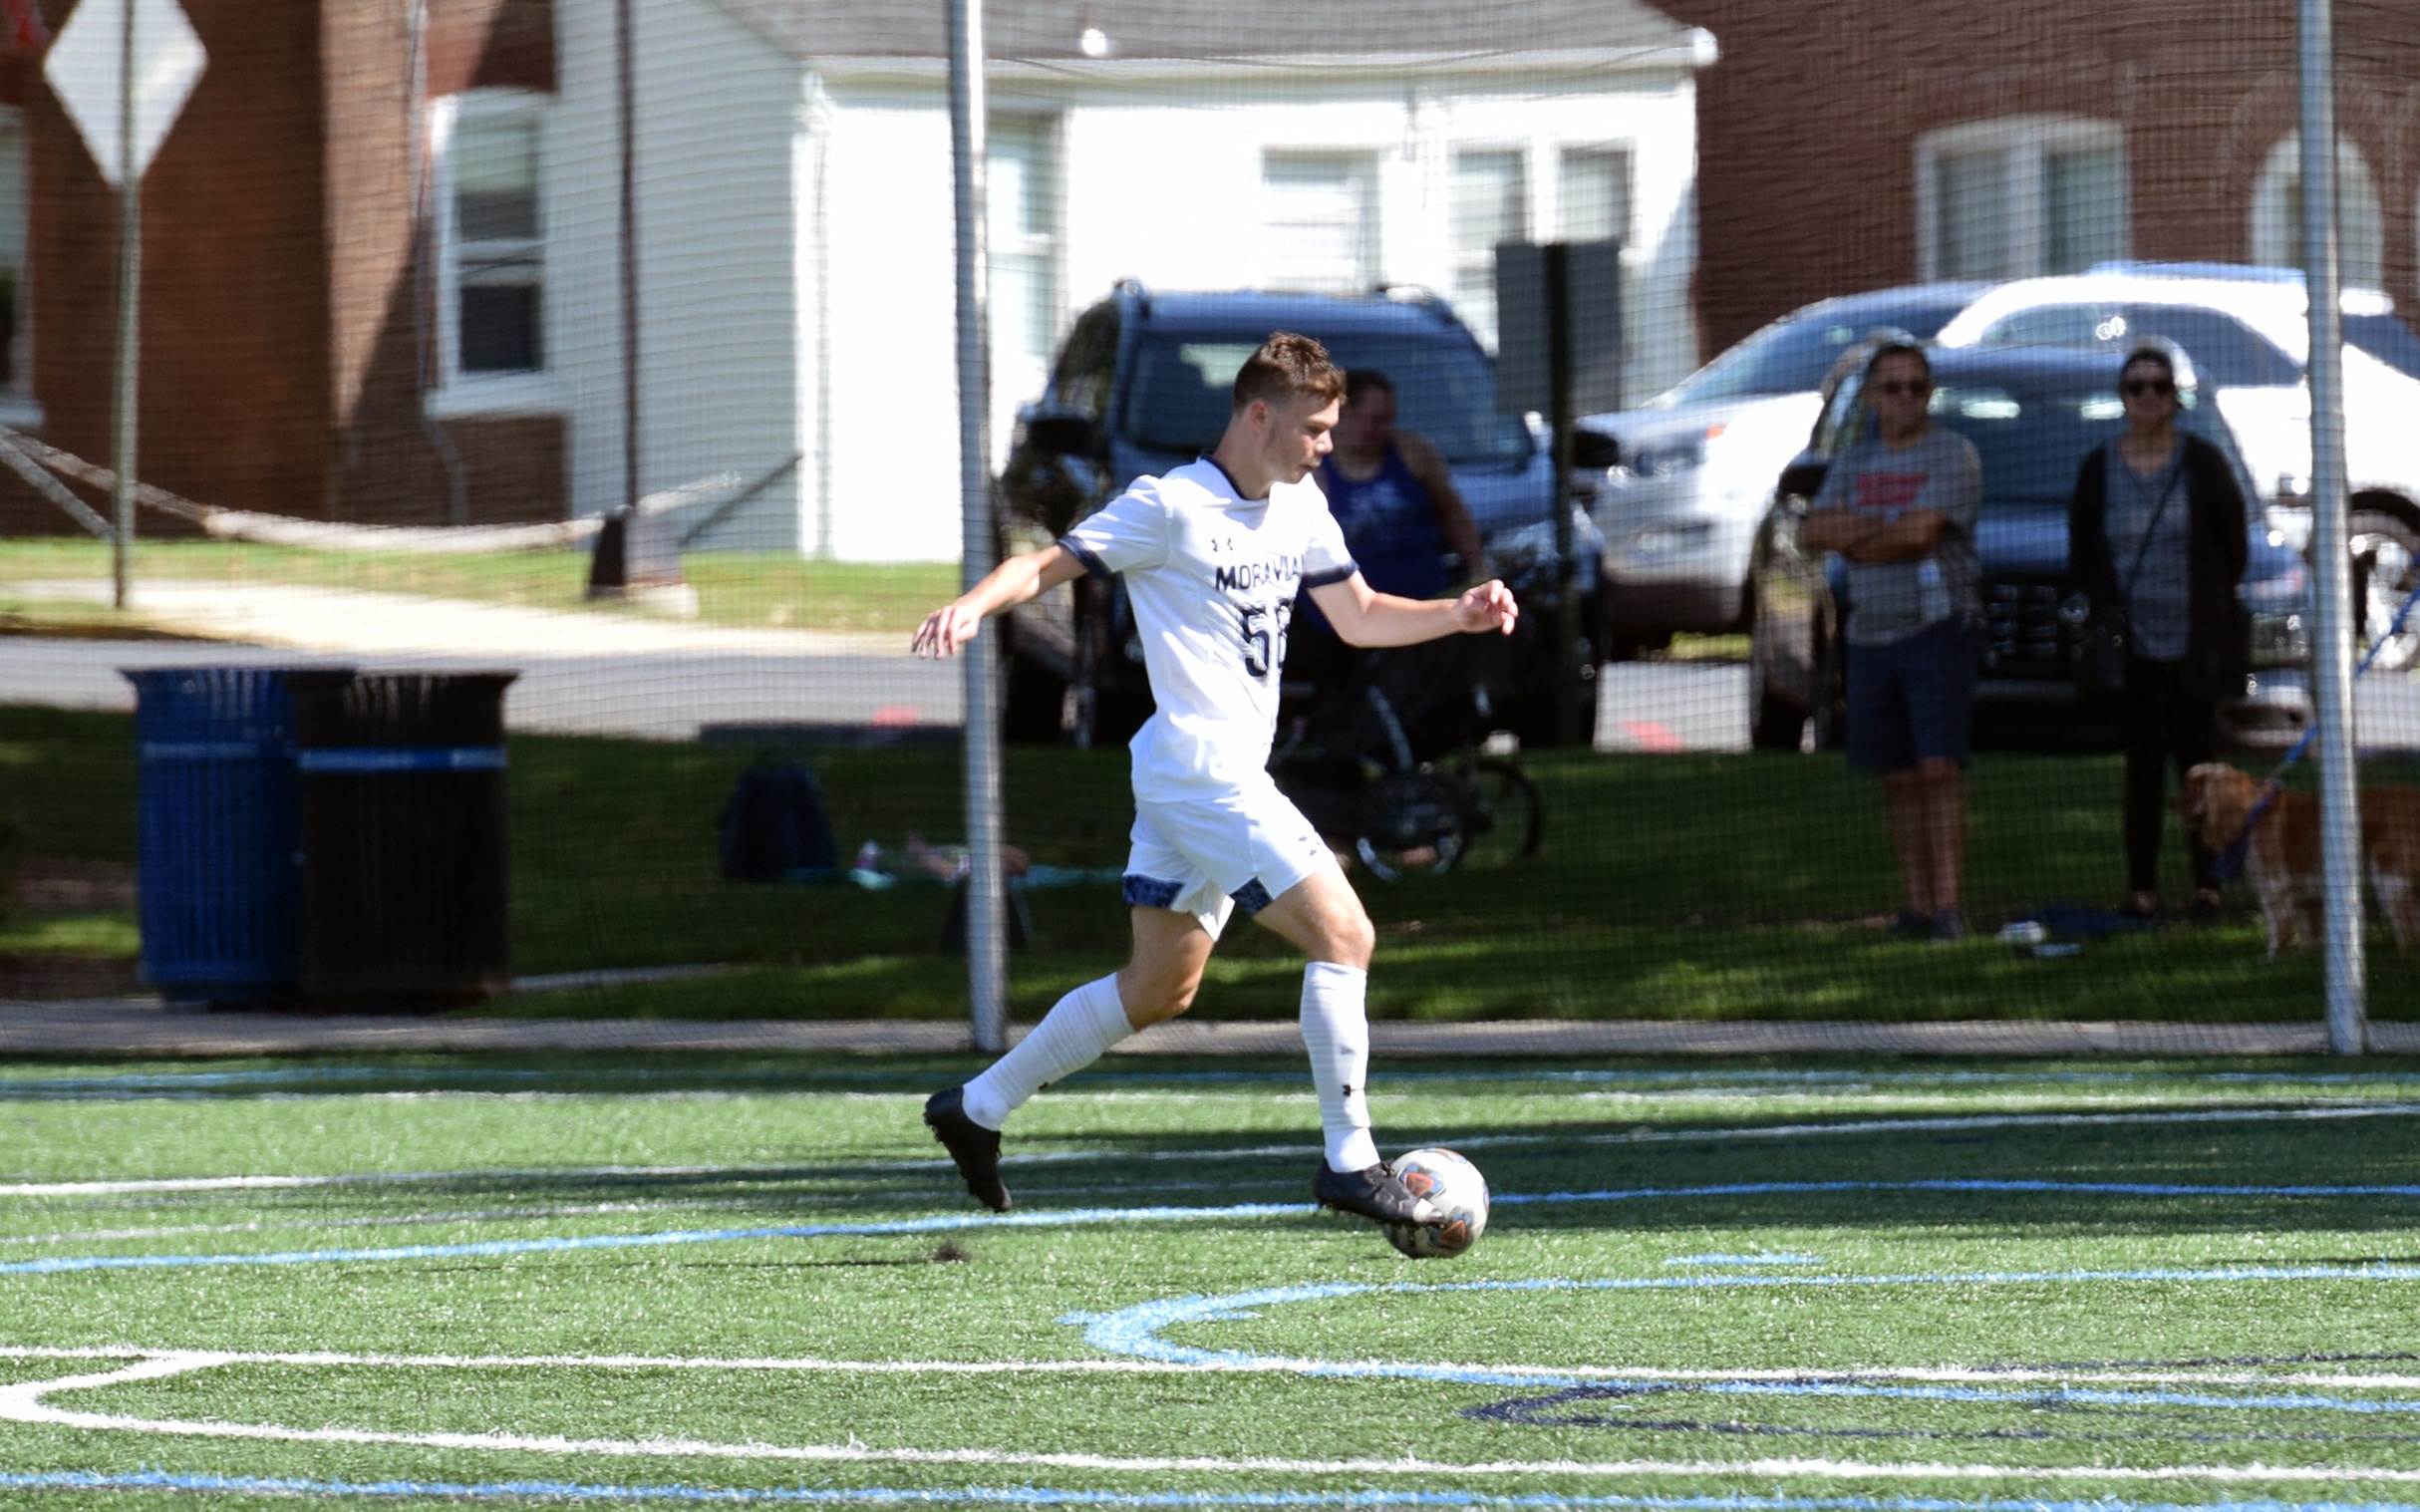 Sophomore Reed Sturza scores game-winning goal in double overtime versus Dickinson College.